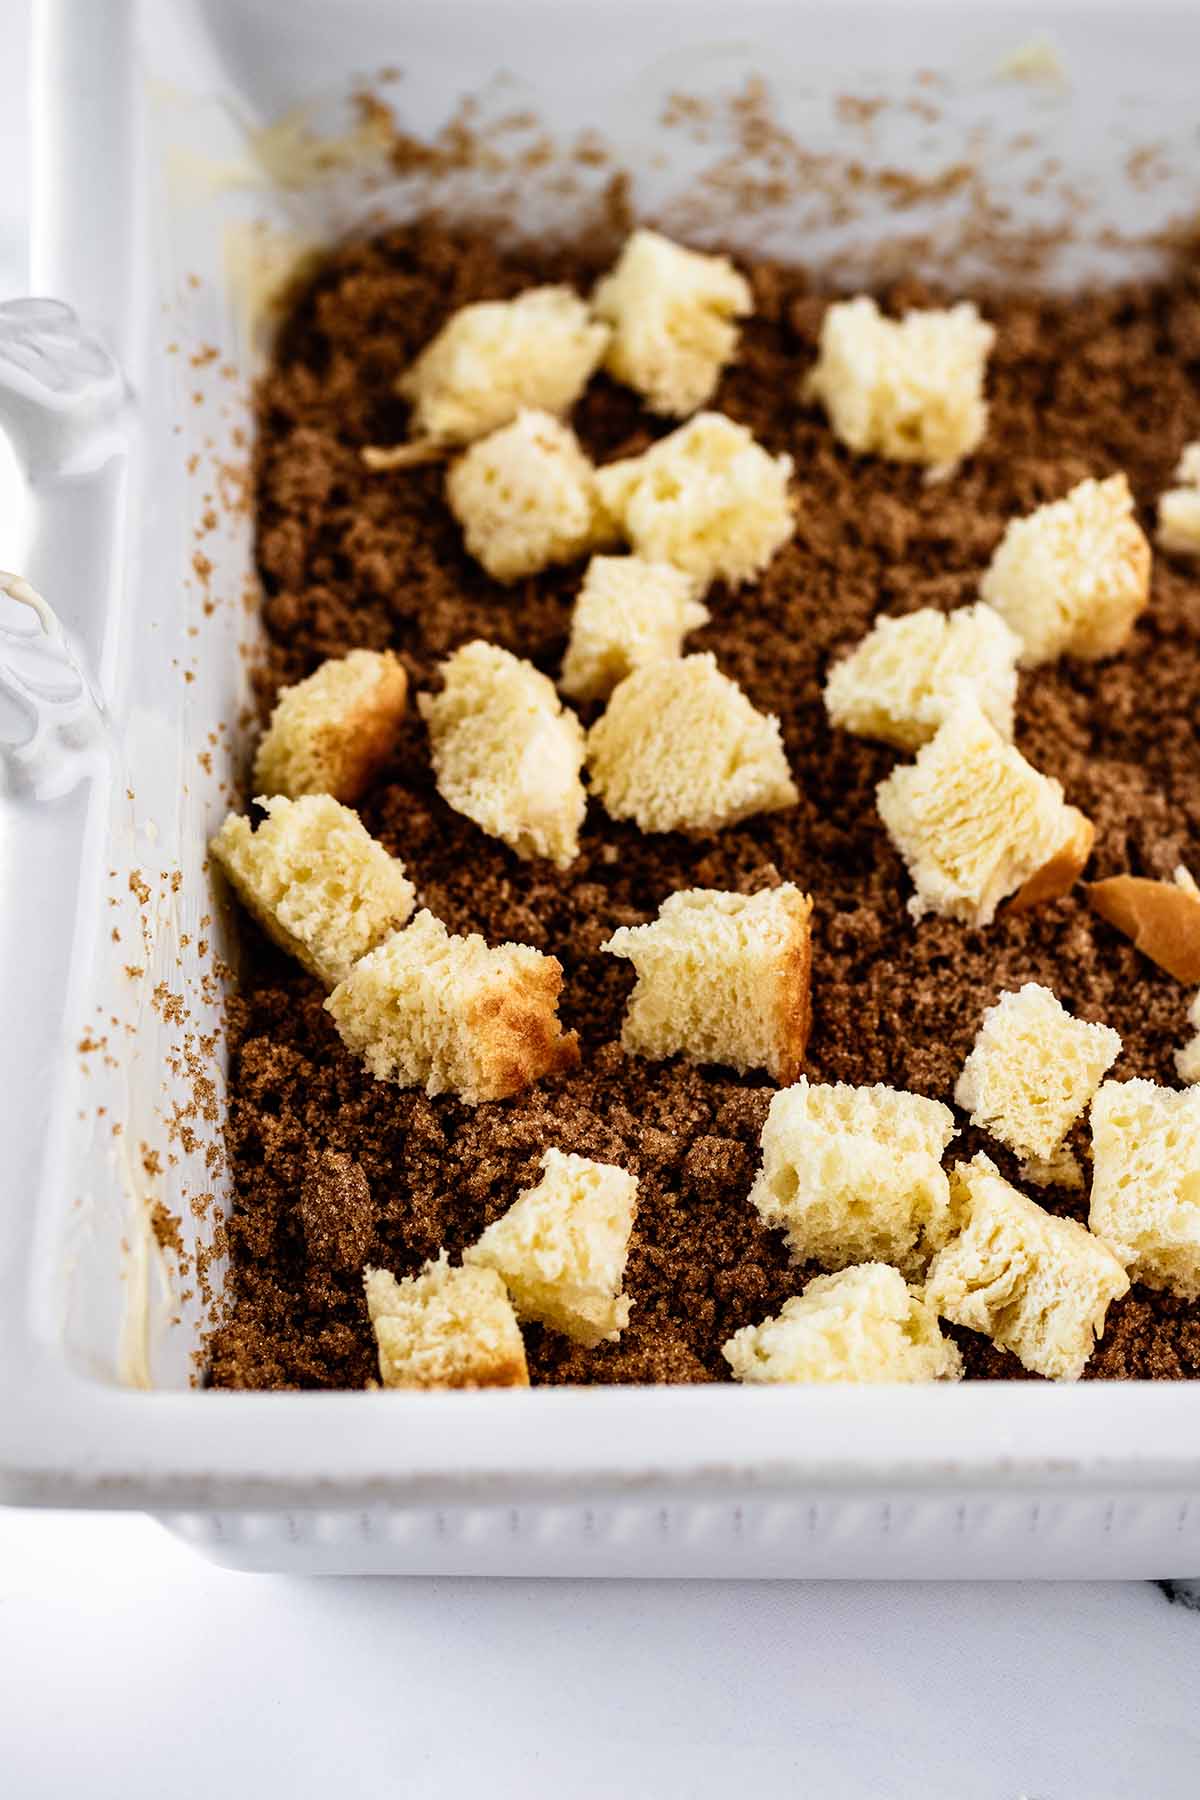 Diced bread sprinkled on top of brown sugar in a white baking dish